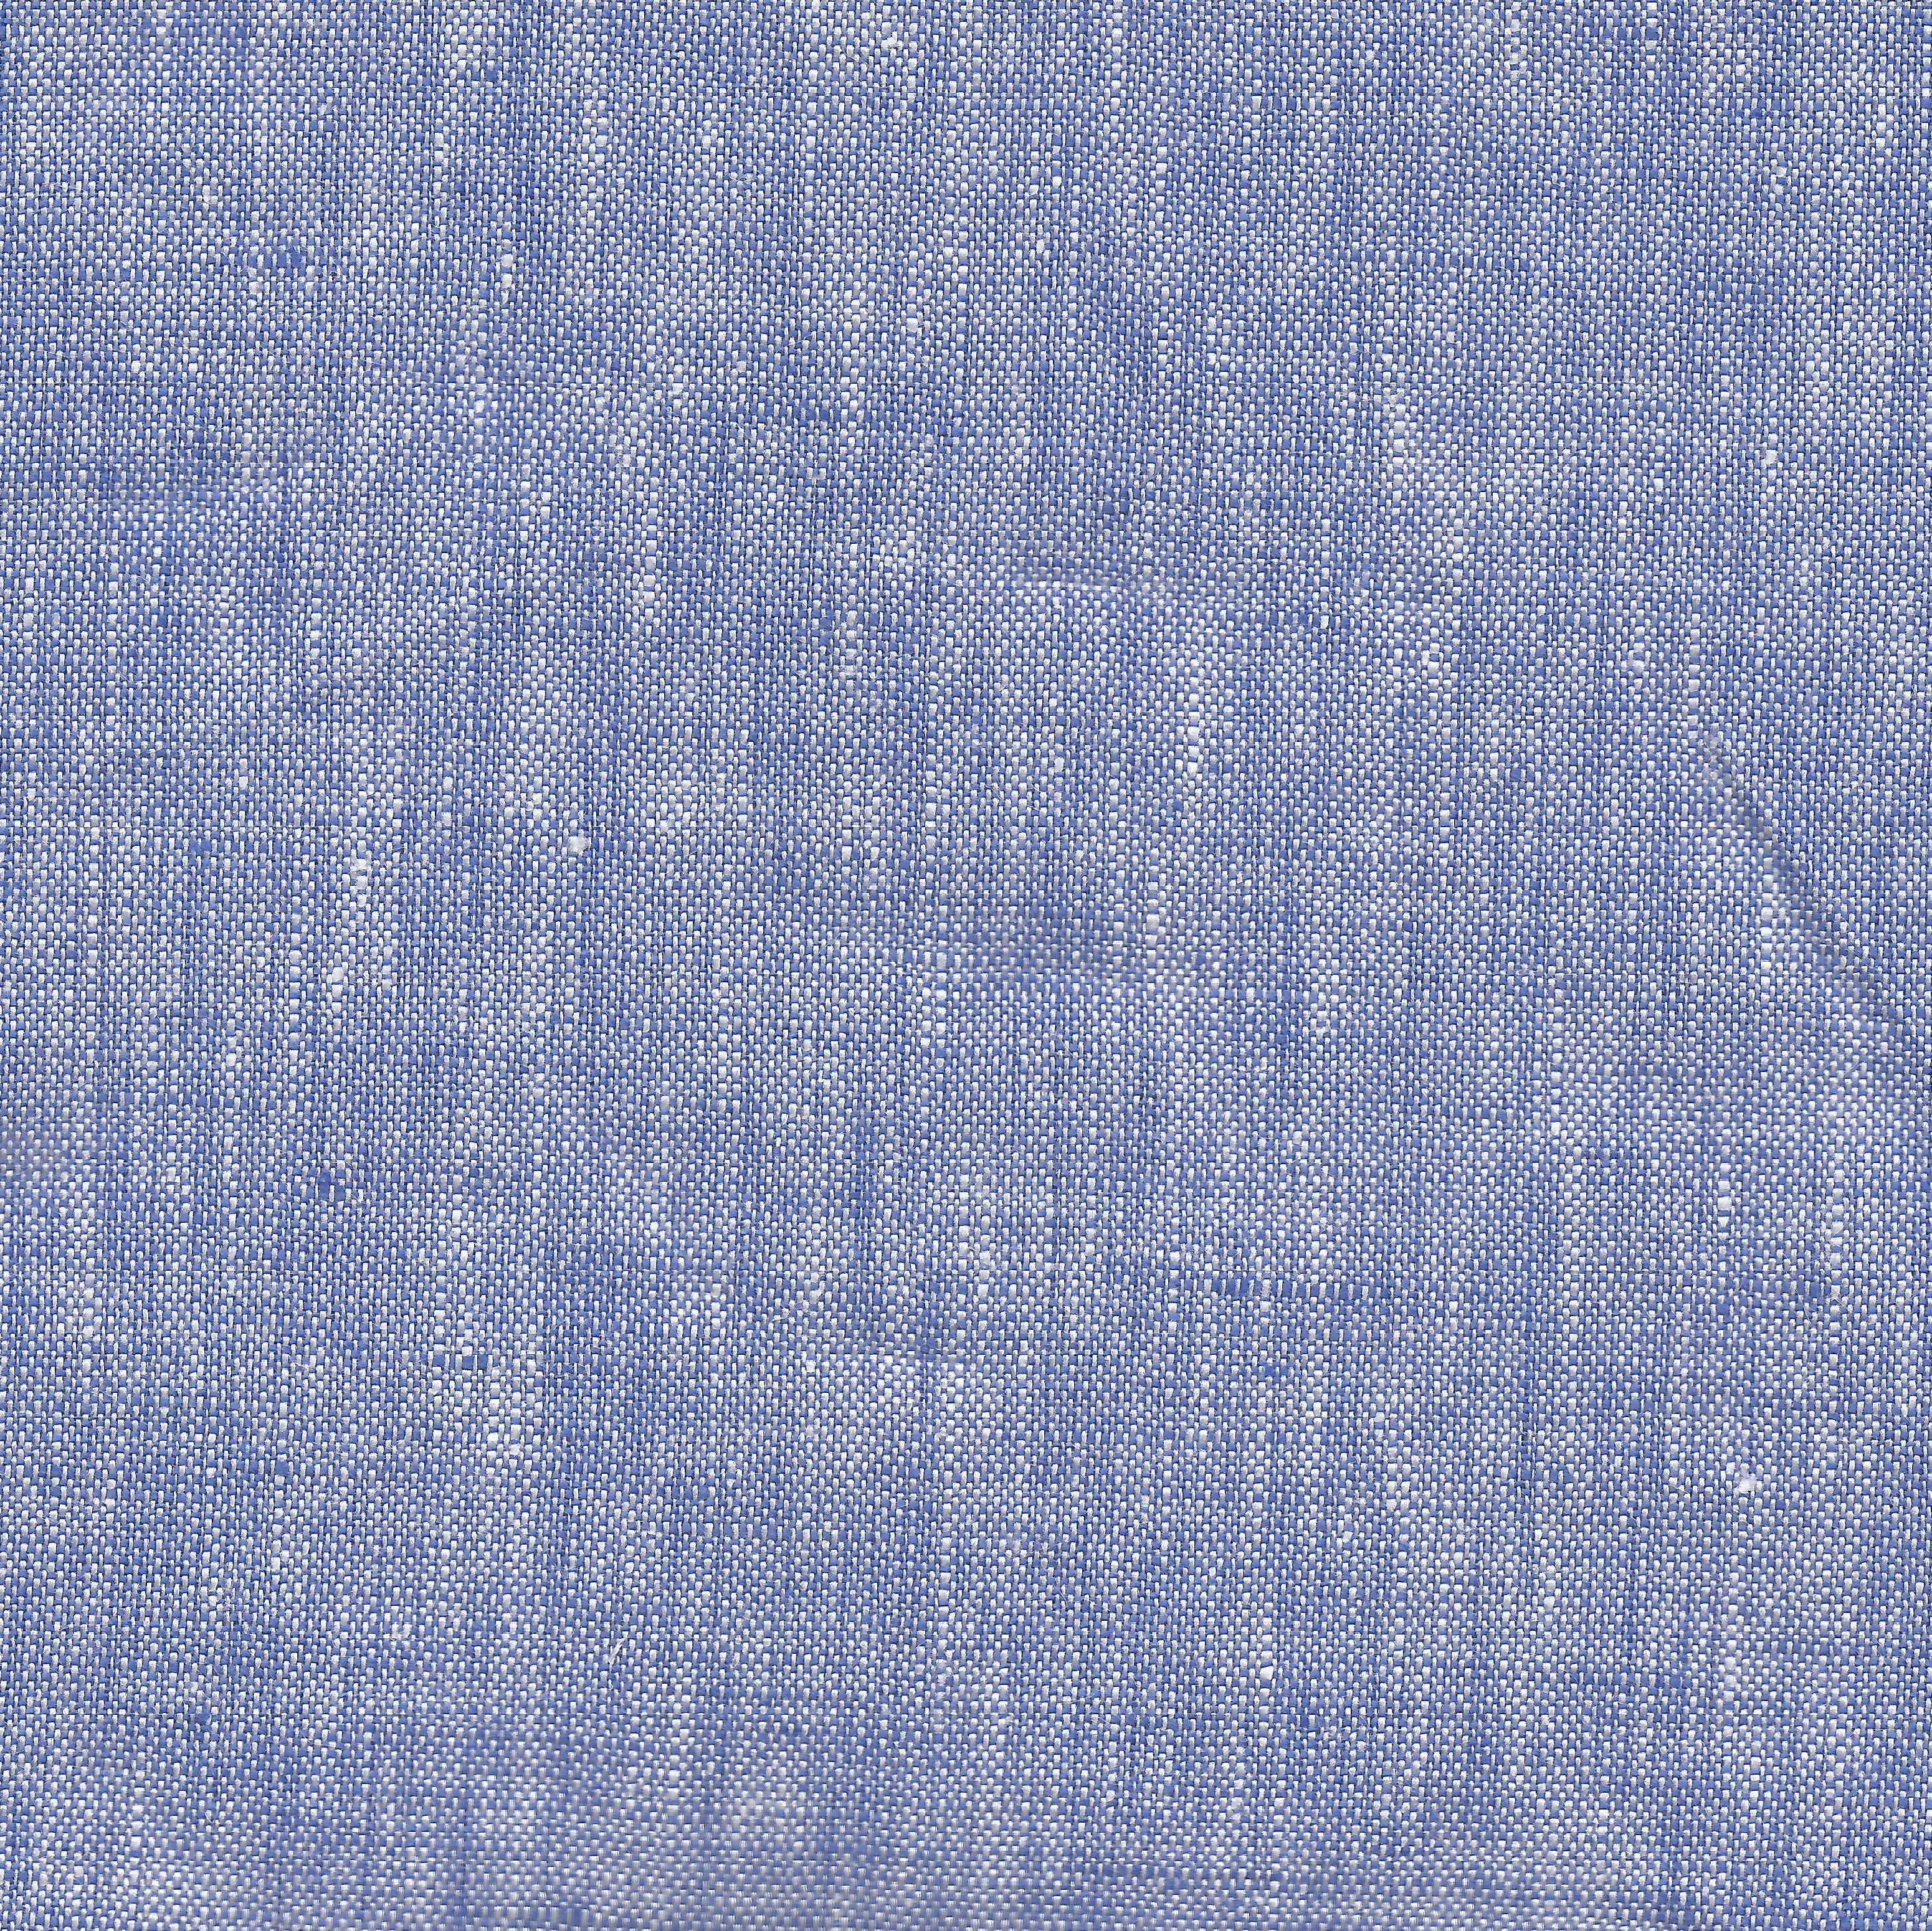 OURENSE WATER AND ICE BLUE LINEN SHIRT